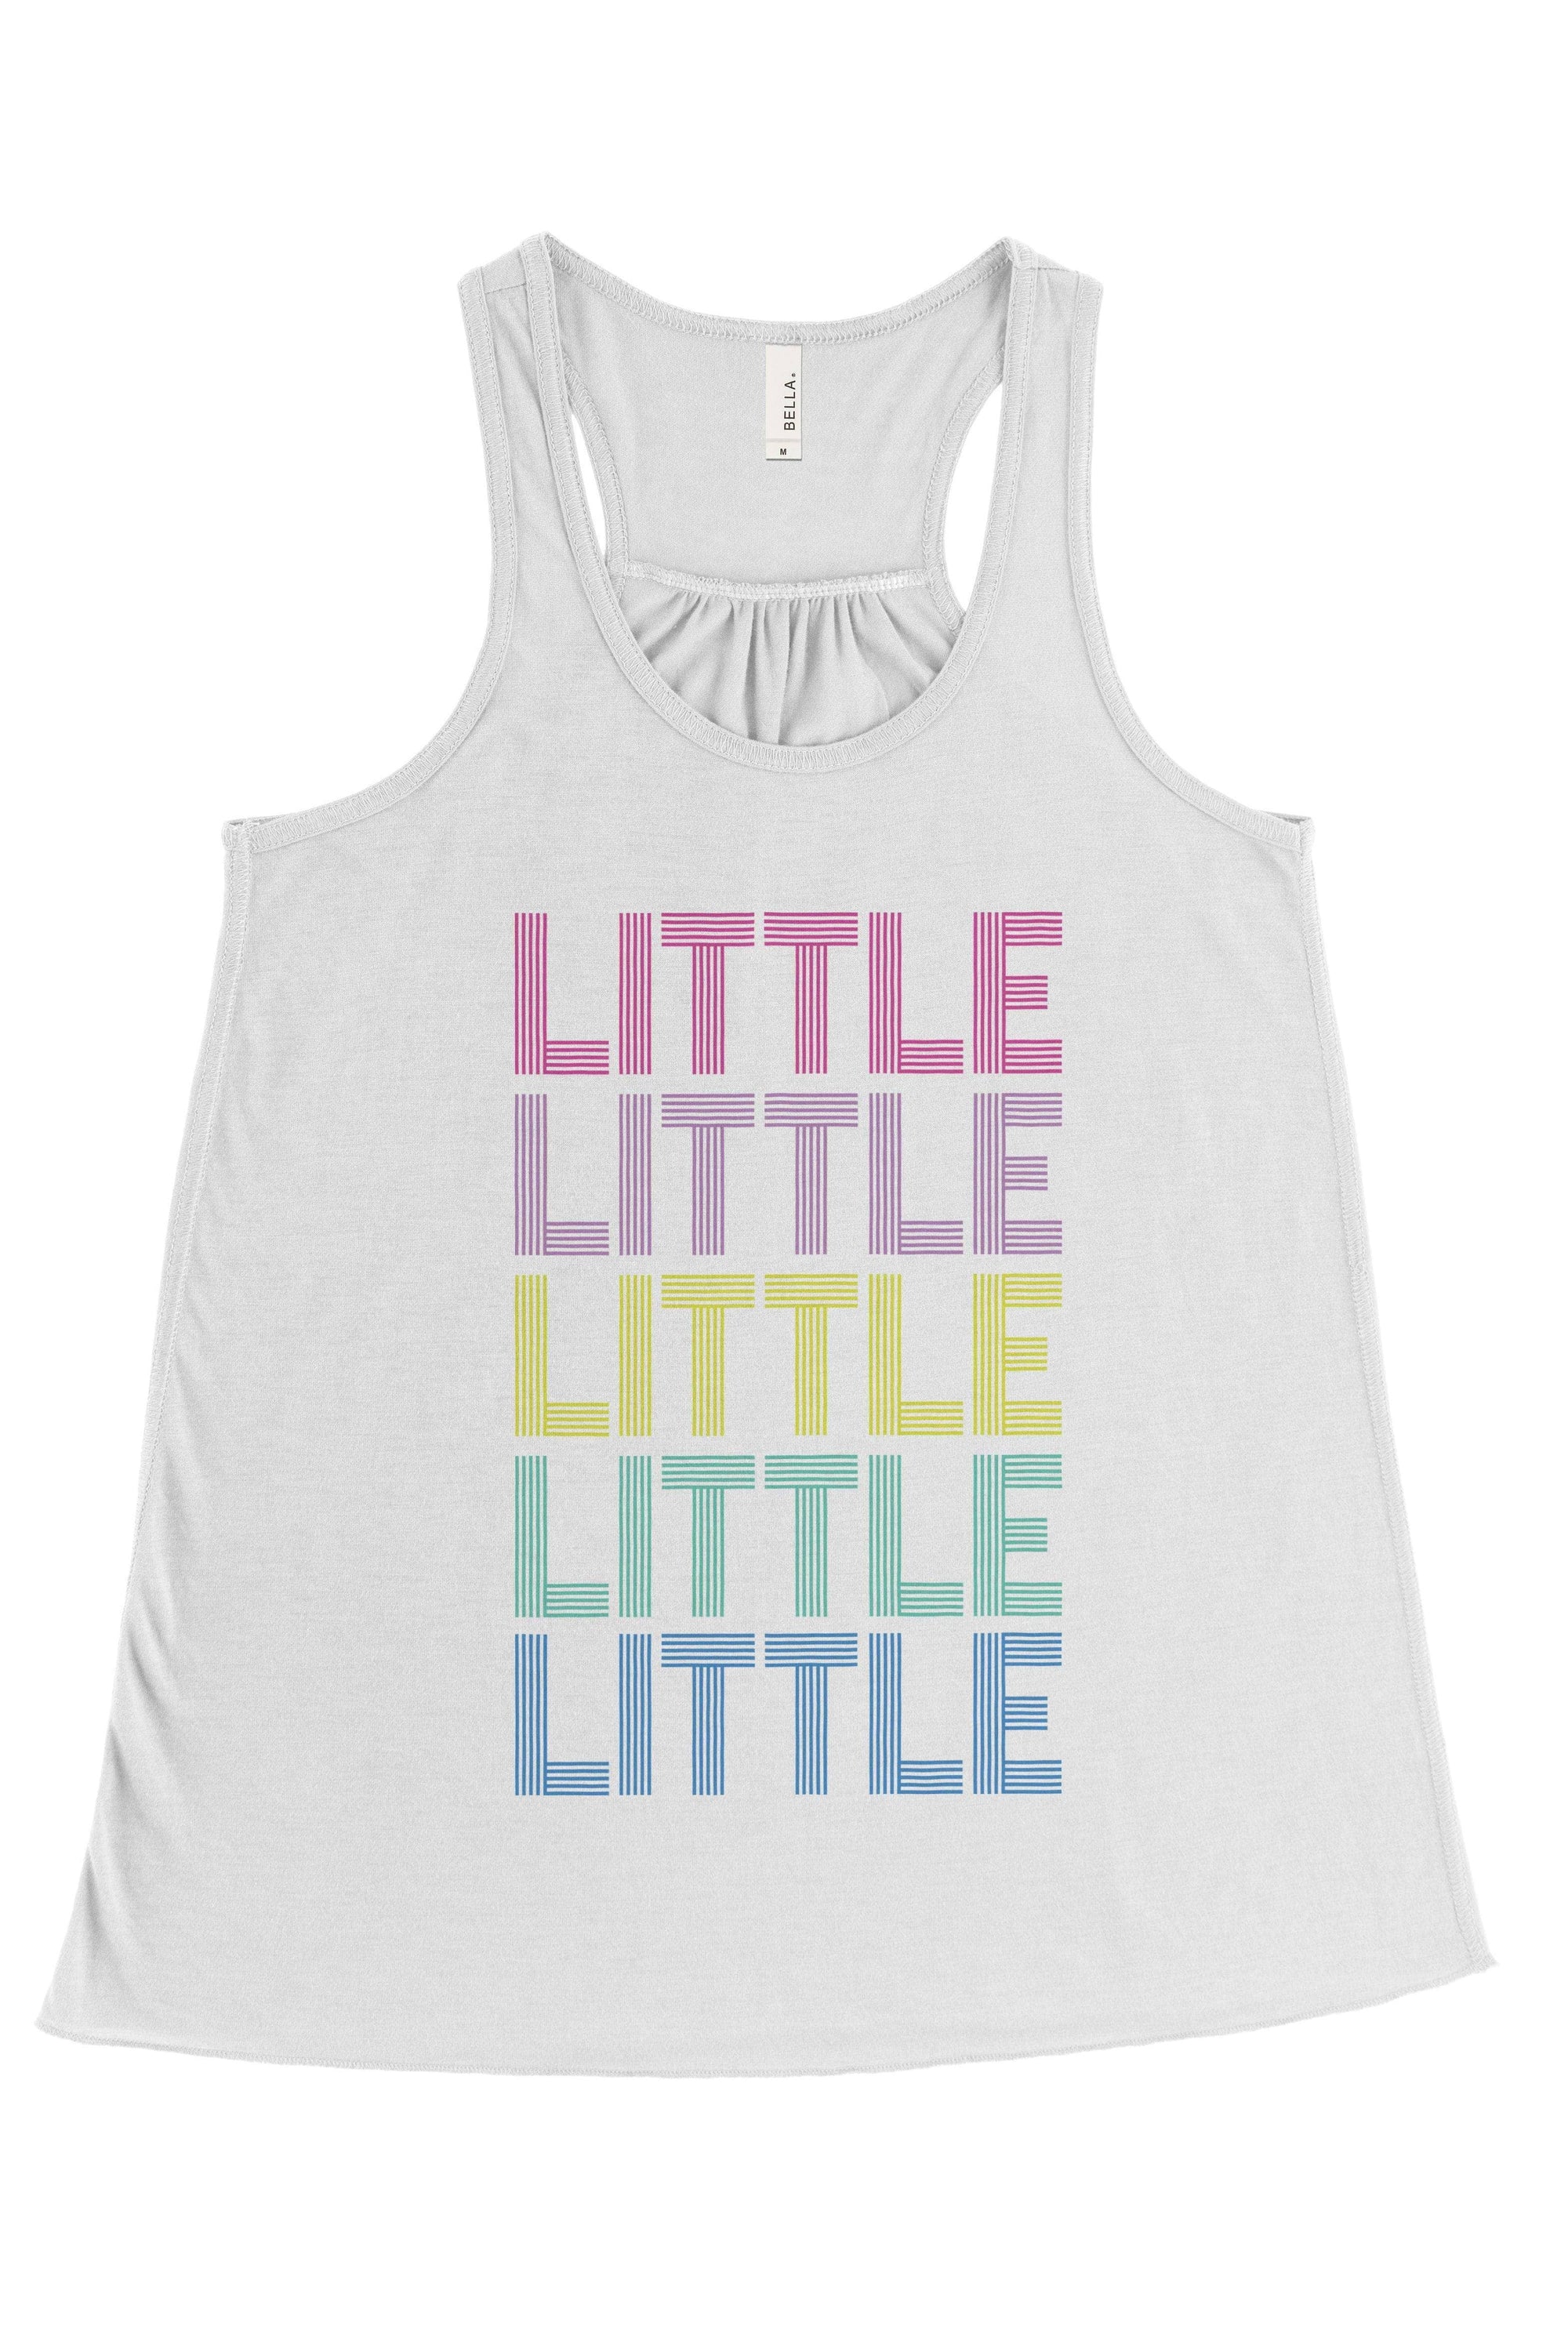 Disco Rainbow Big Little Bella Canvas Flowy Racerback Tank, Ladies, Sunny and Southern, - Sunny and Southern,